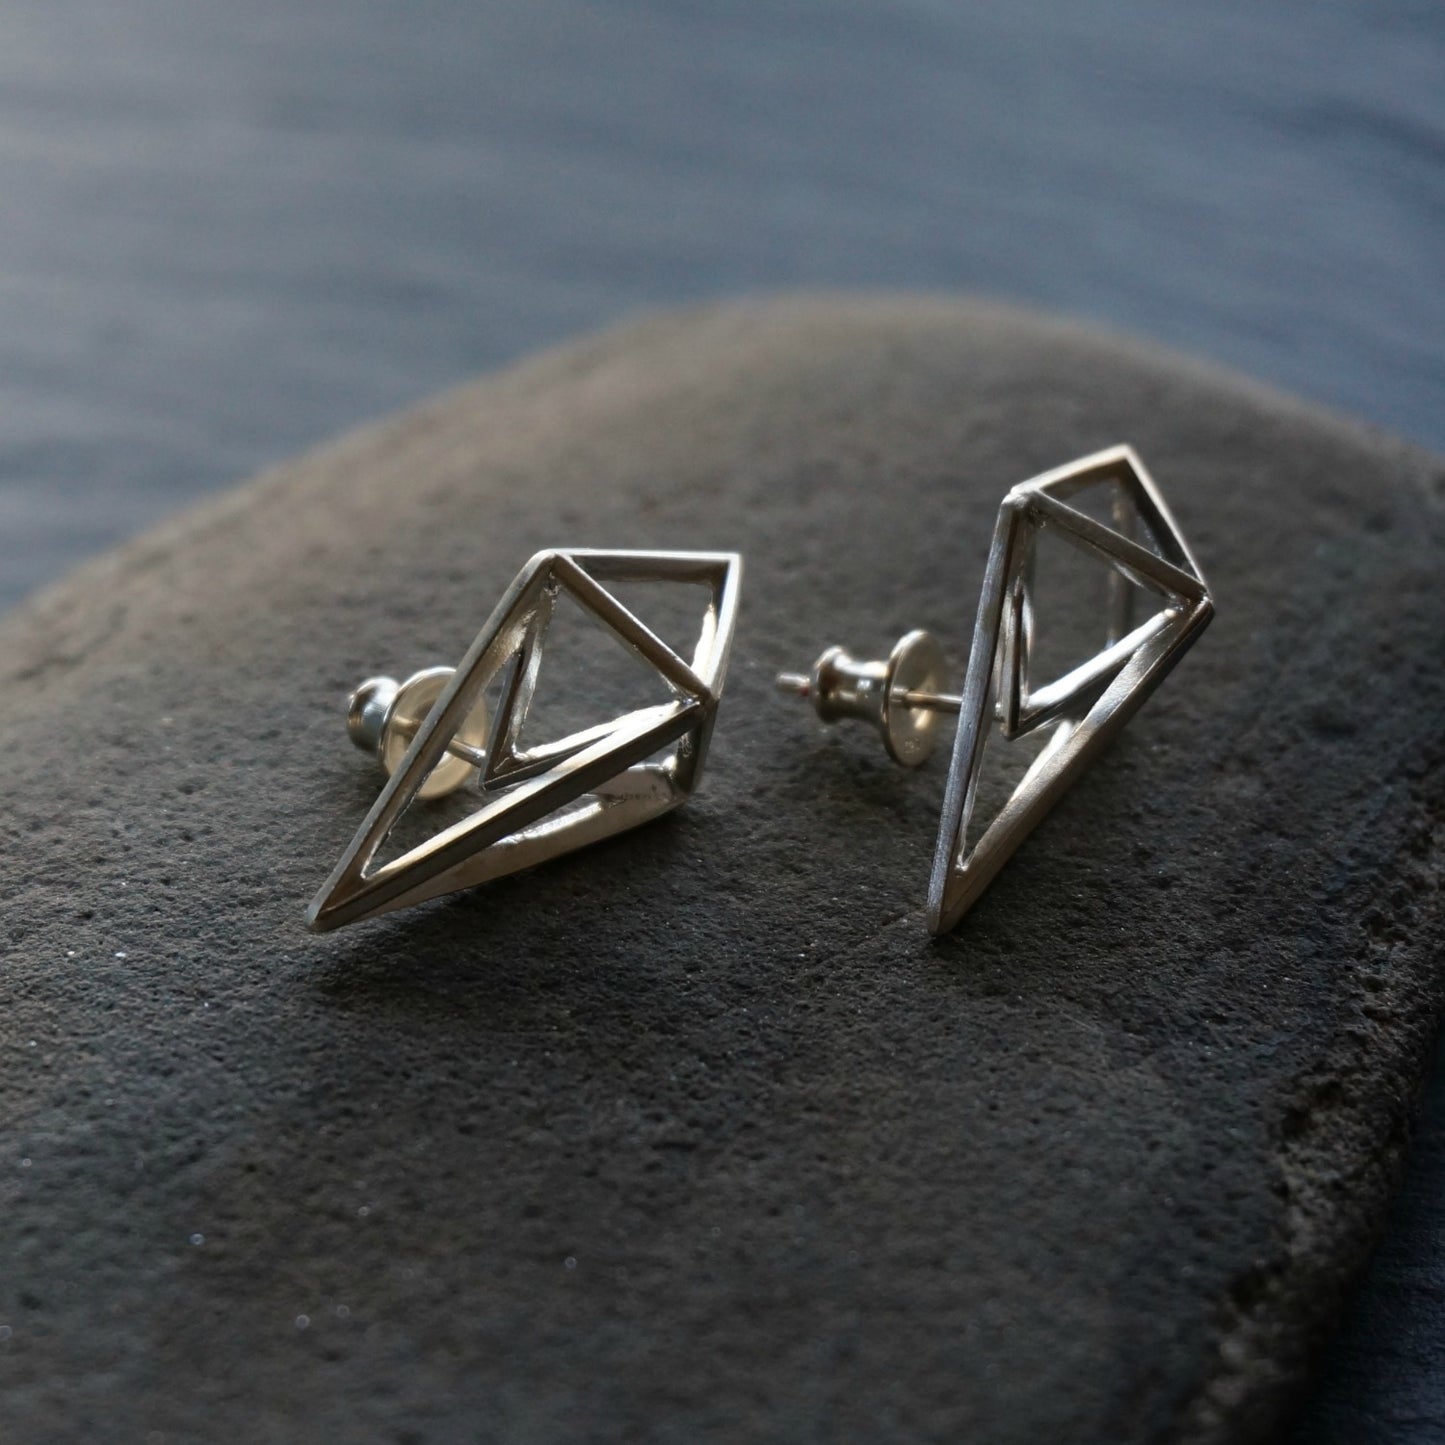 Load image into Gallery viewer, Rhombus Silver Stud Earrings - SOWELL JEWELRY
